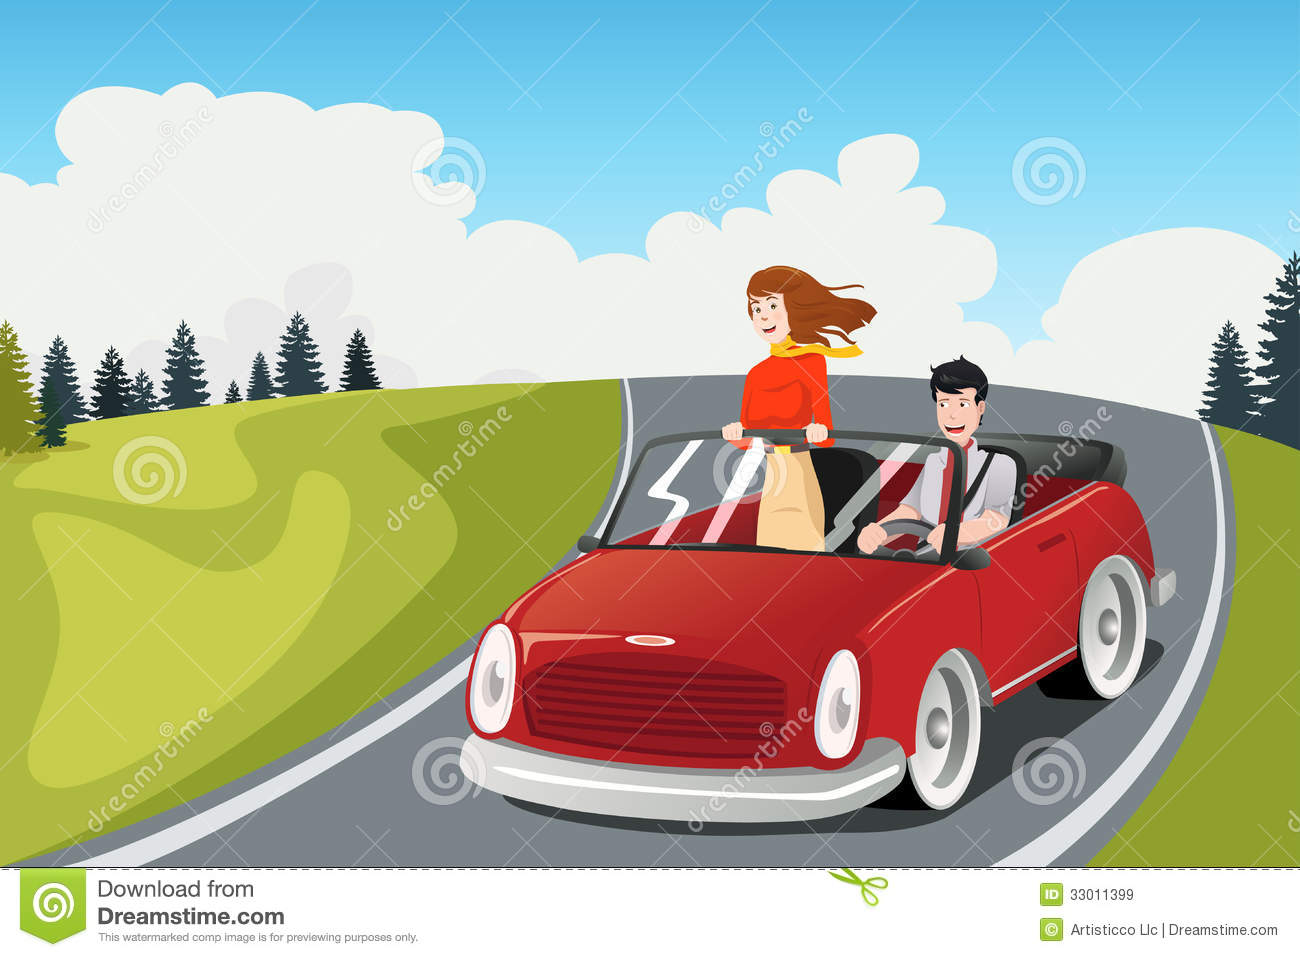 Vector Illustration Of Happy Couple Riding A Car Going On A Road Trip